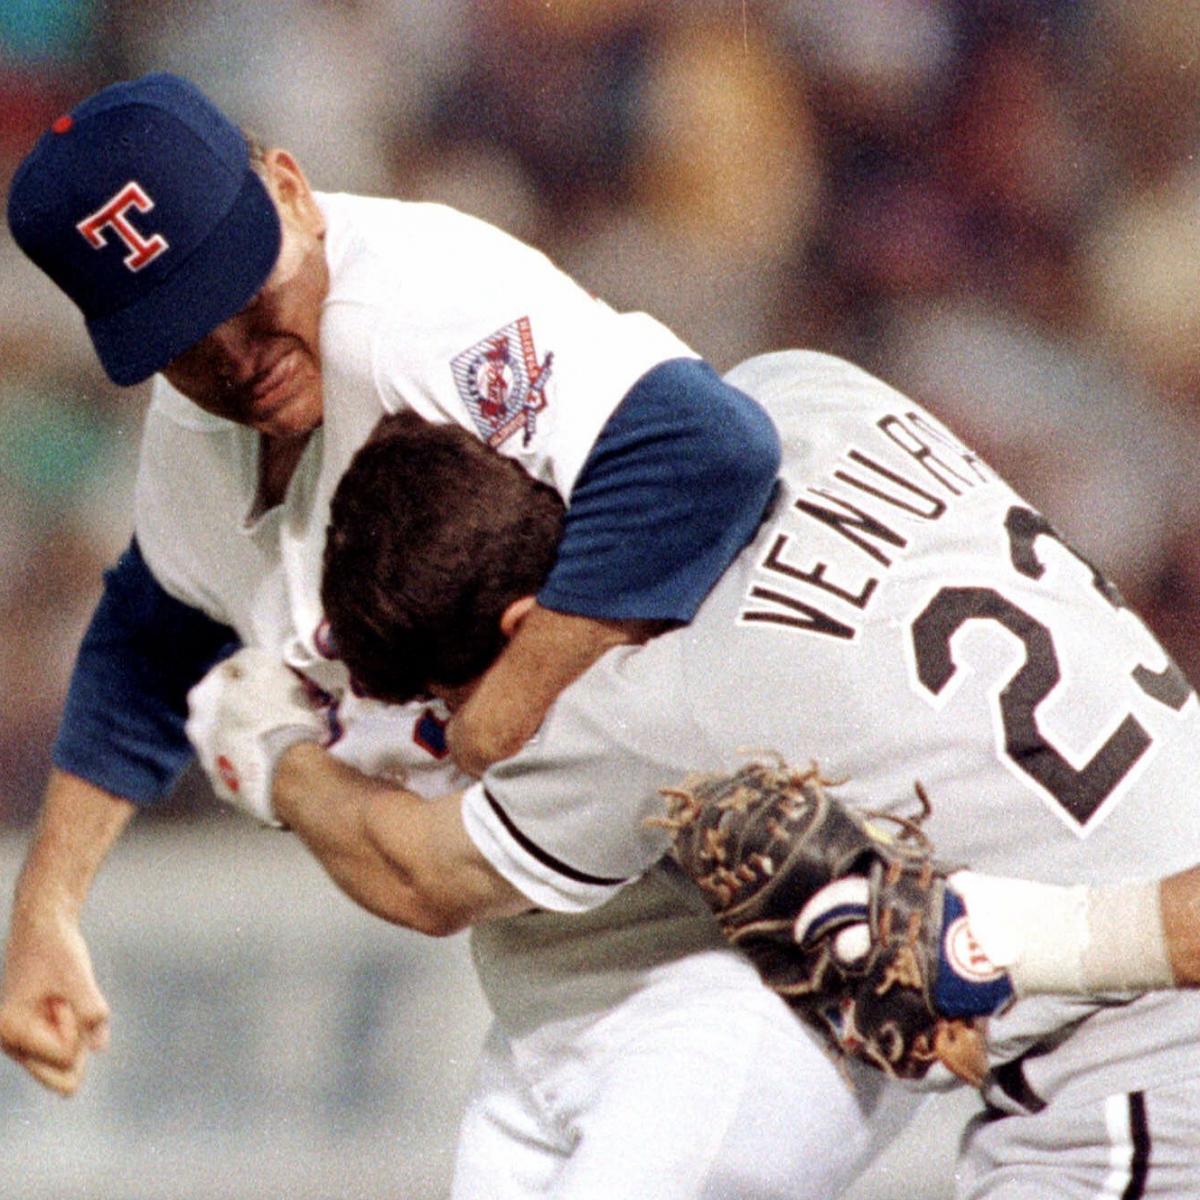 Images: Robin Ventura Through The Years